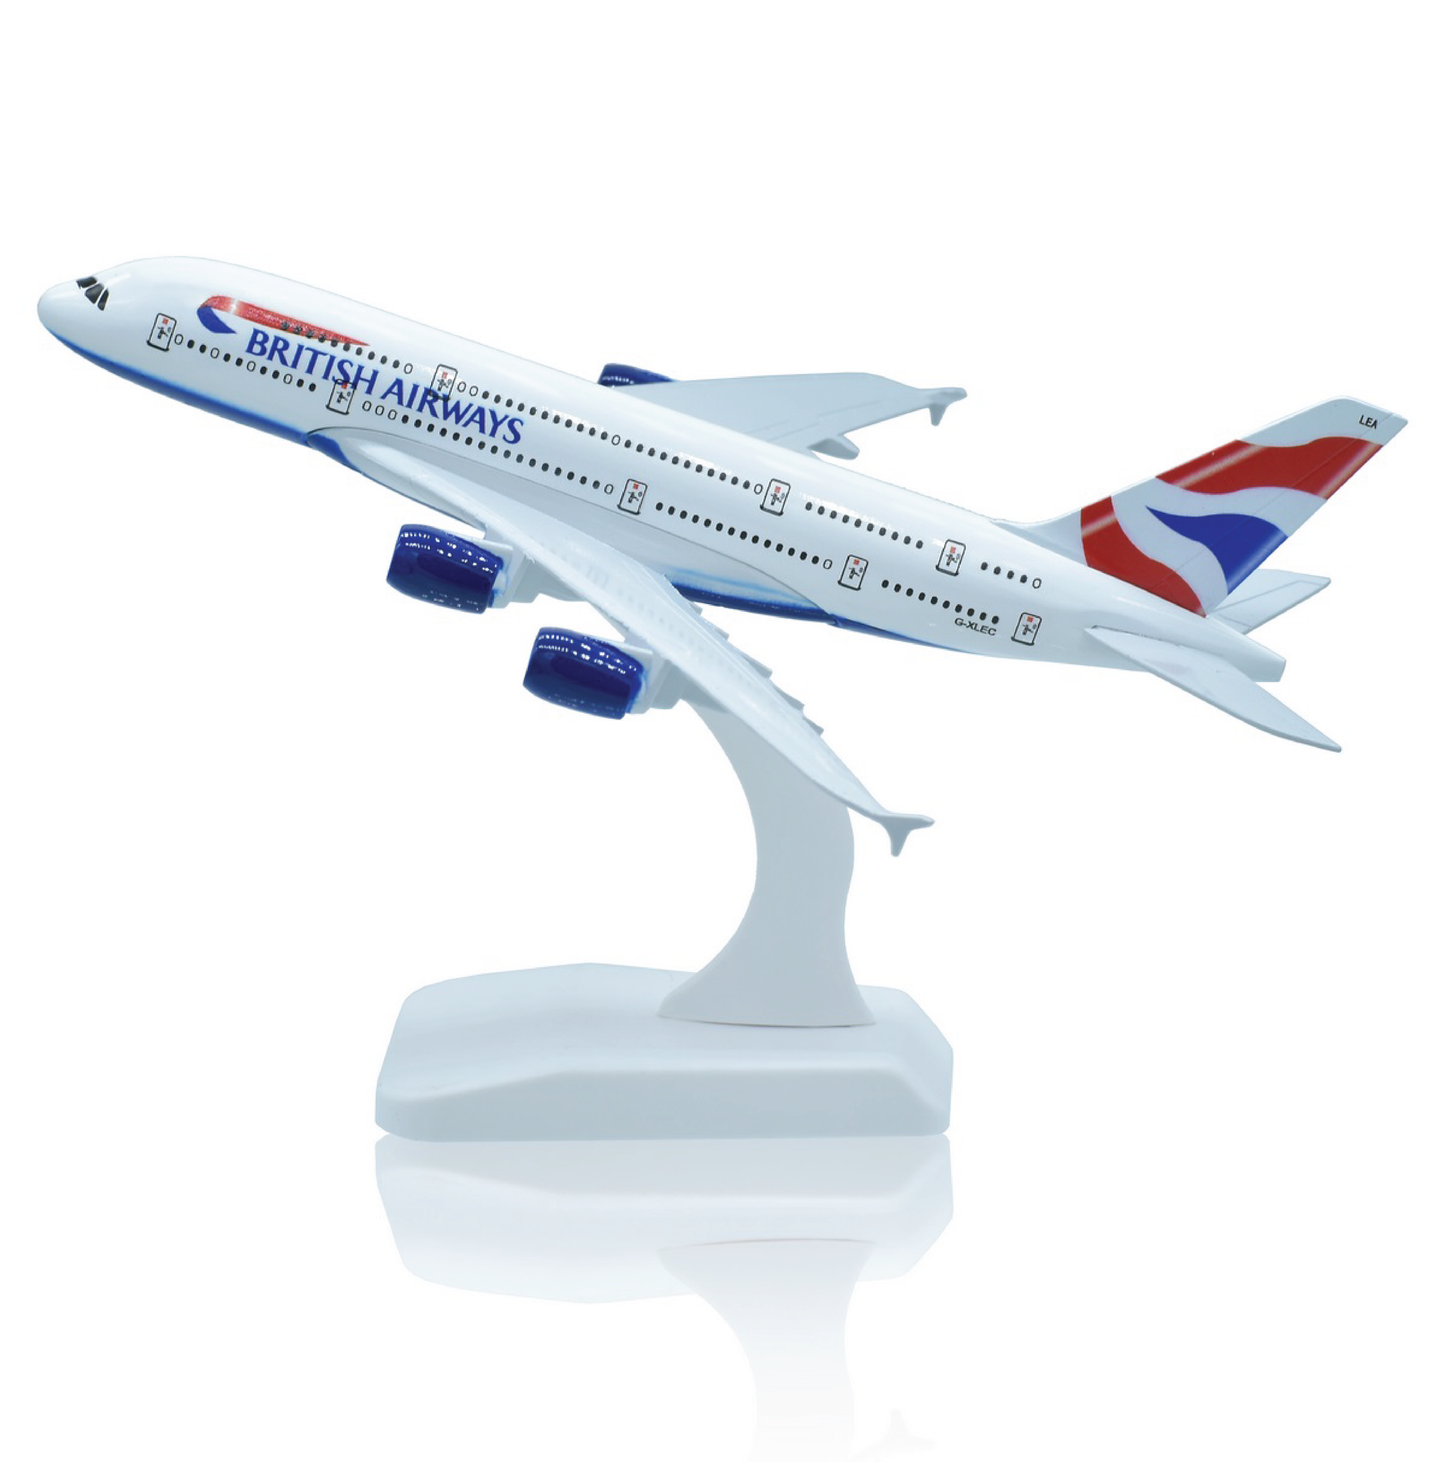 Aircraft Model Big British Airways - For Office Use, Personal Use, or Corporate Gifting JA